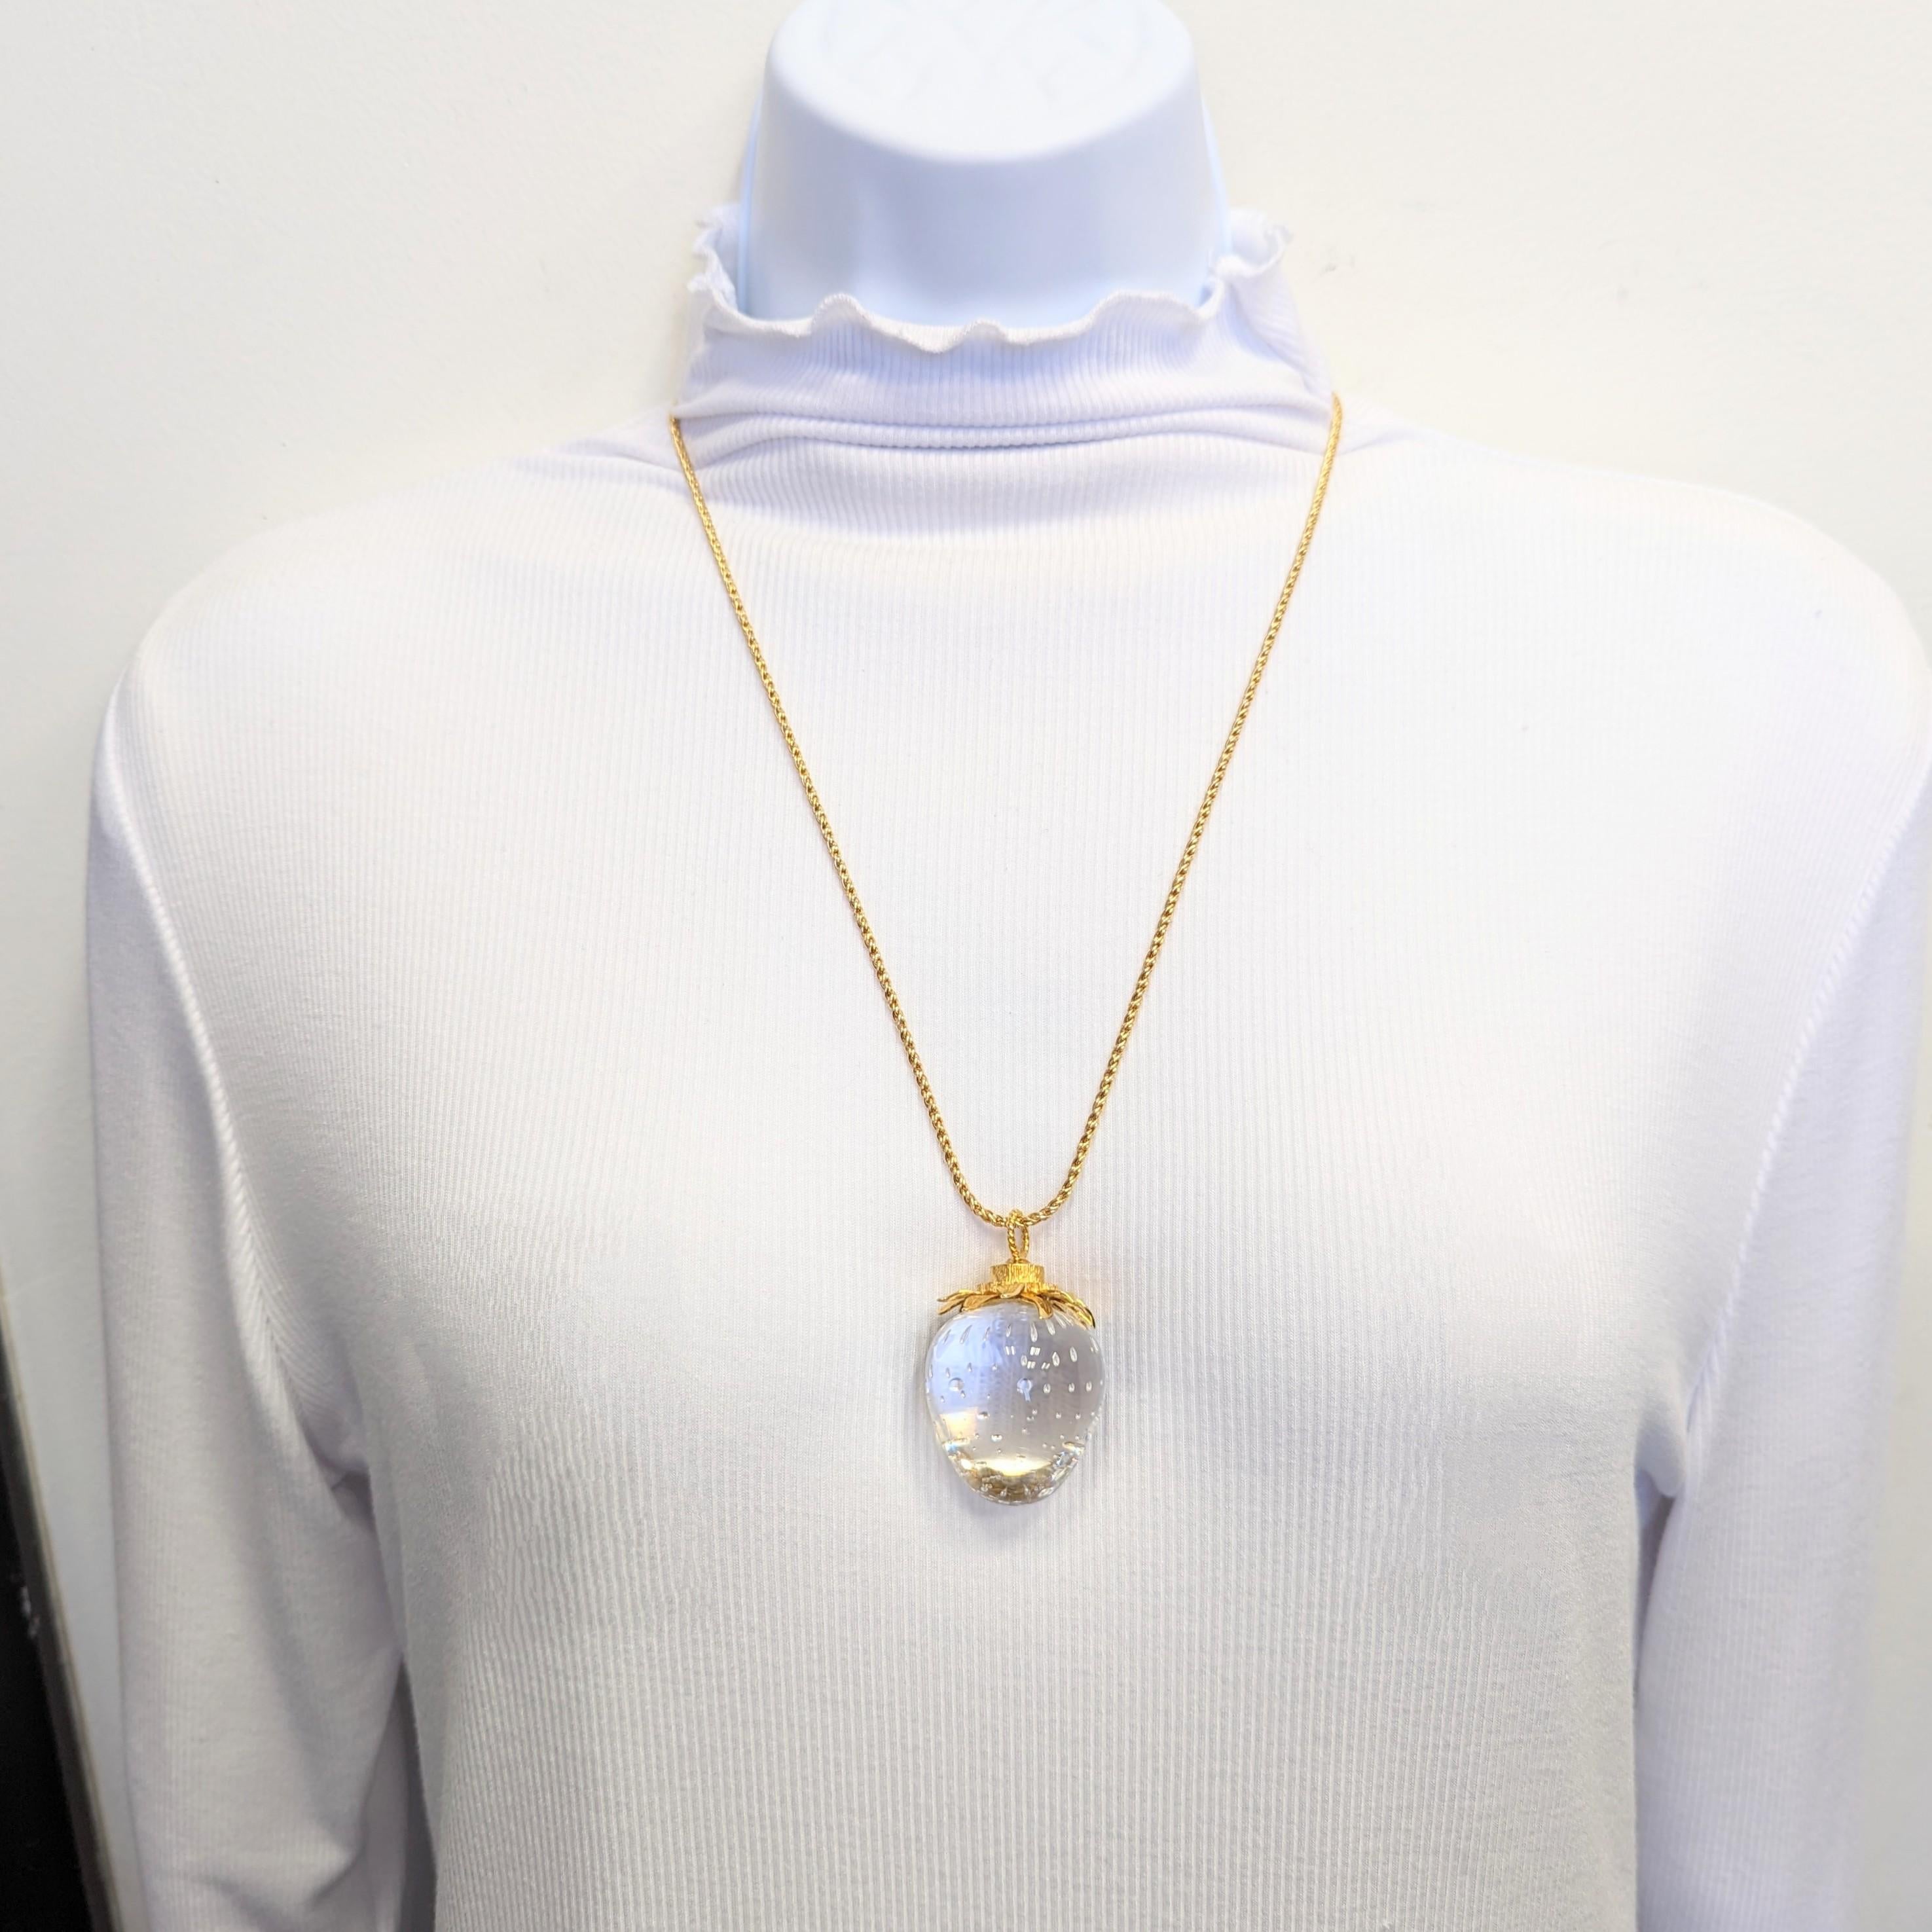 Beautiful estate Steuben Glass strawberry pendant necklace handmade in 14k yellow gold.  Length of chain is 22